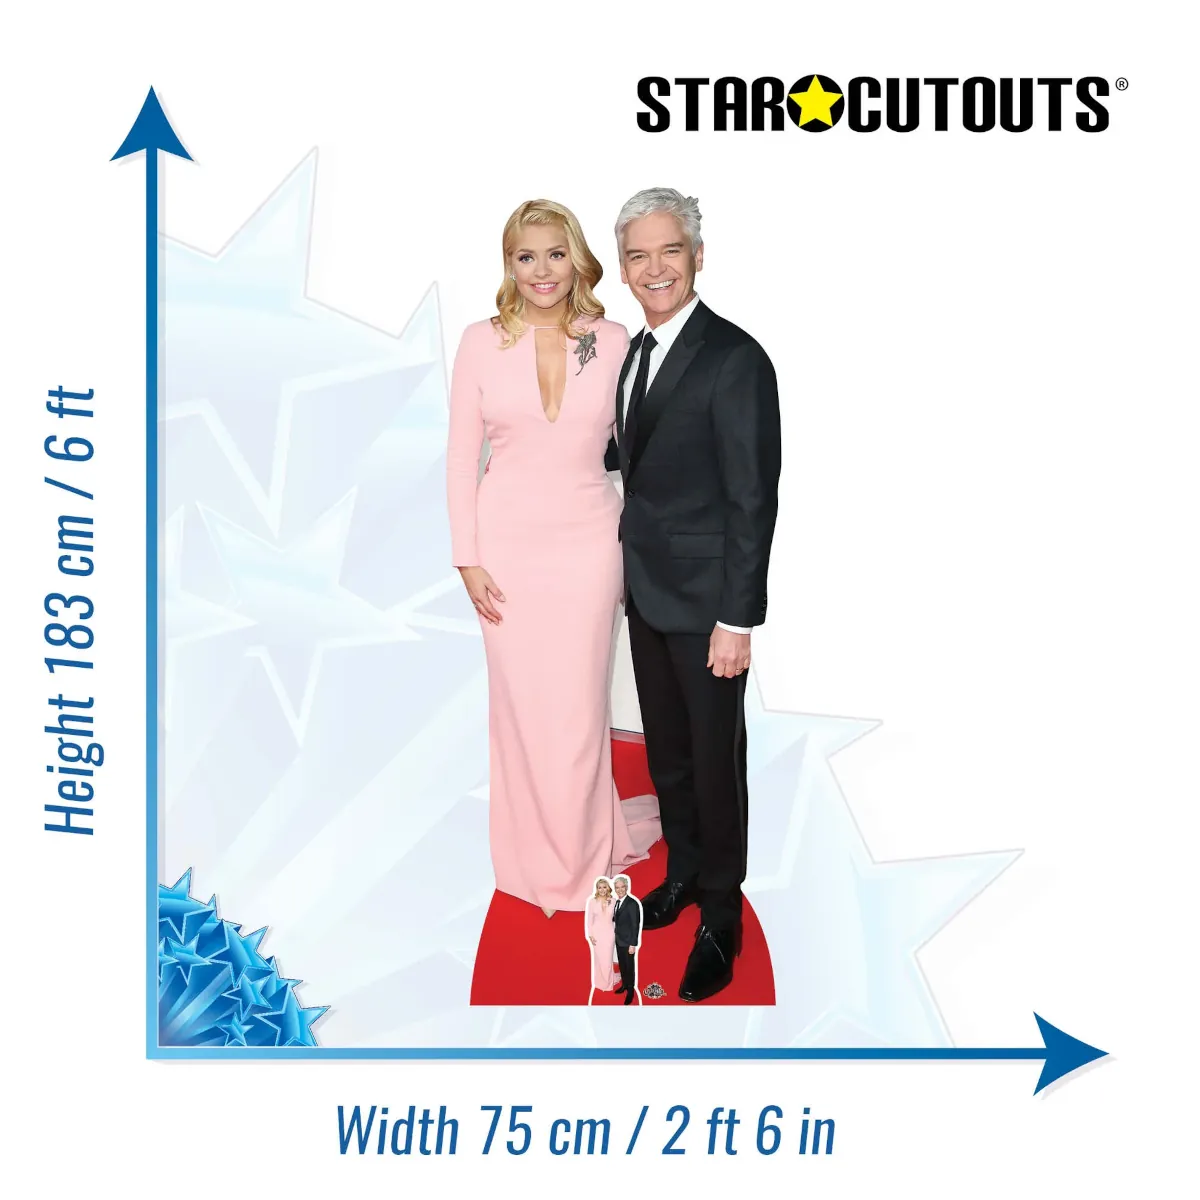 CS737 Holly Willoughby & Phillip Schofield (Television Presenters) Lifesize + Mini Cardboard Cutout Standee Size